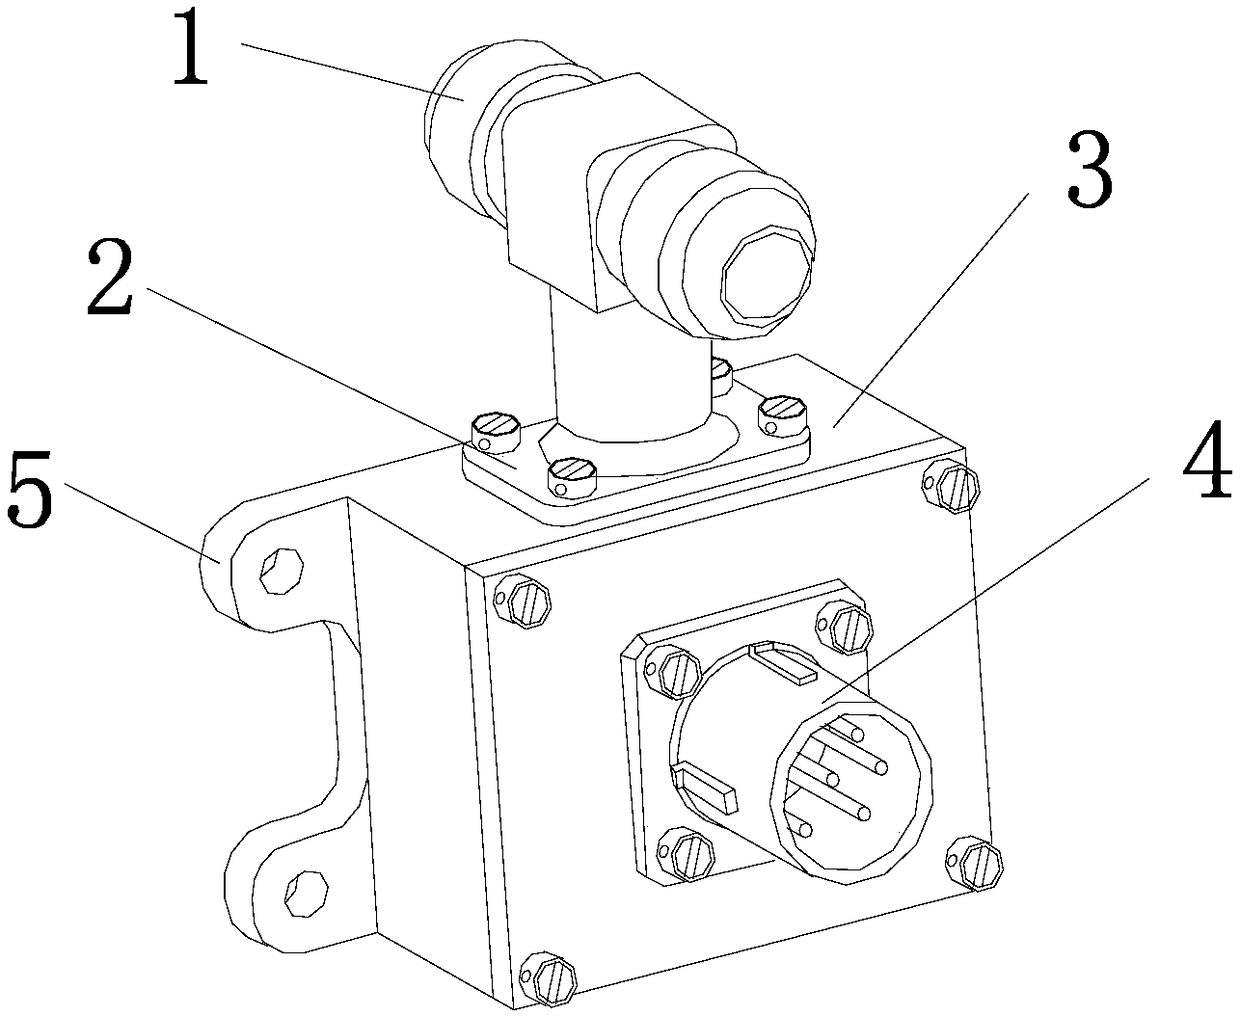 A platinum resistance temperature sensor for a hydraulic system and its application method